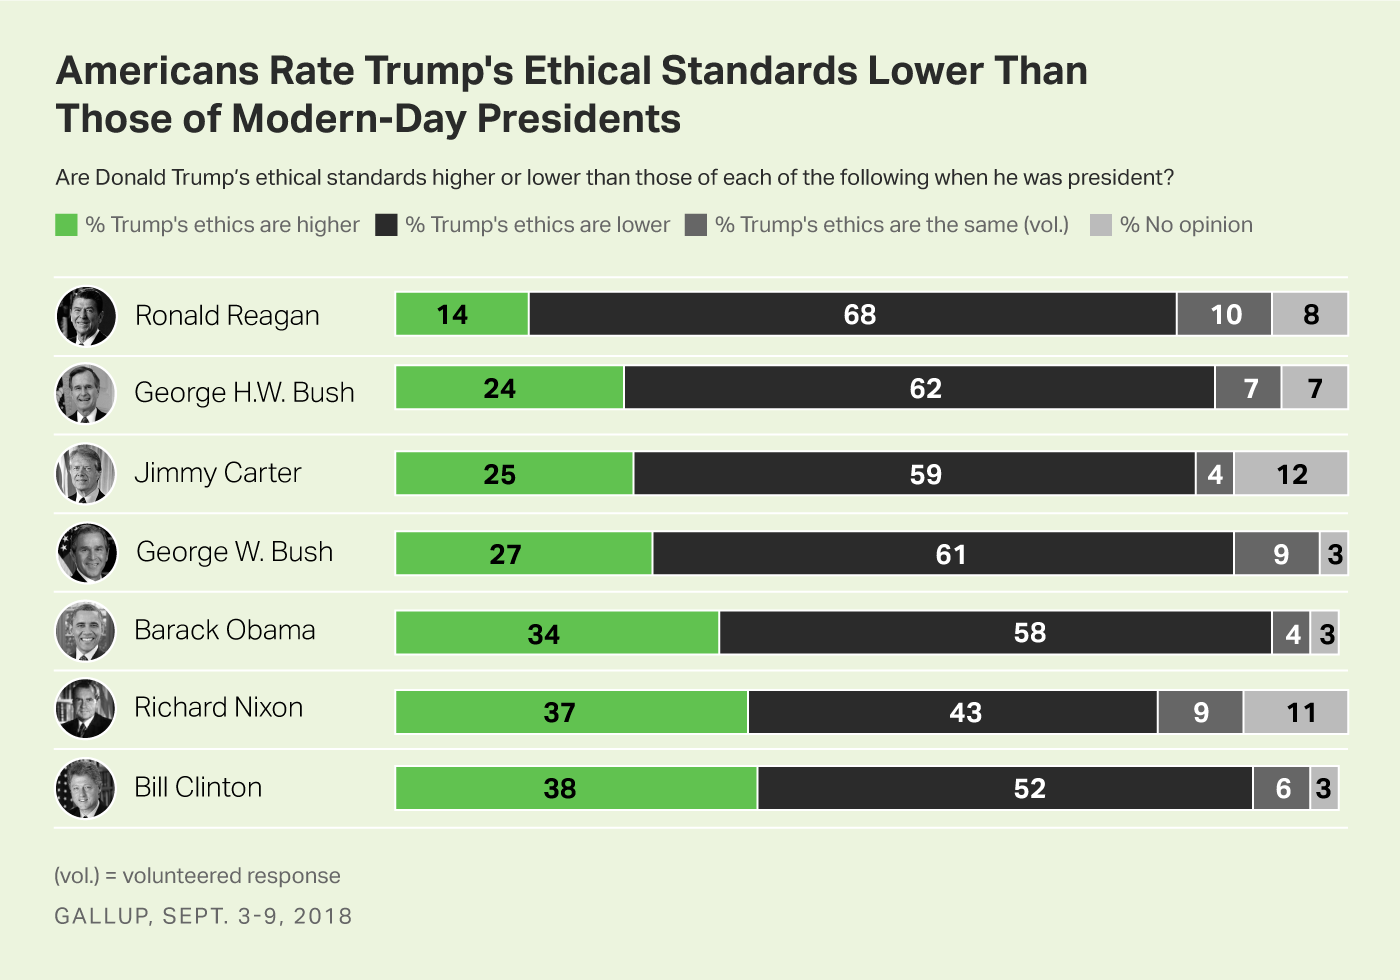 Bar charts showing the public’s views of Trump’s ethical standards as lower than the last seven elected U.S. presidents.